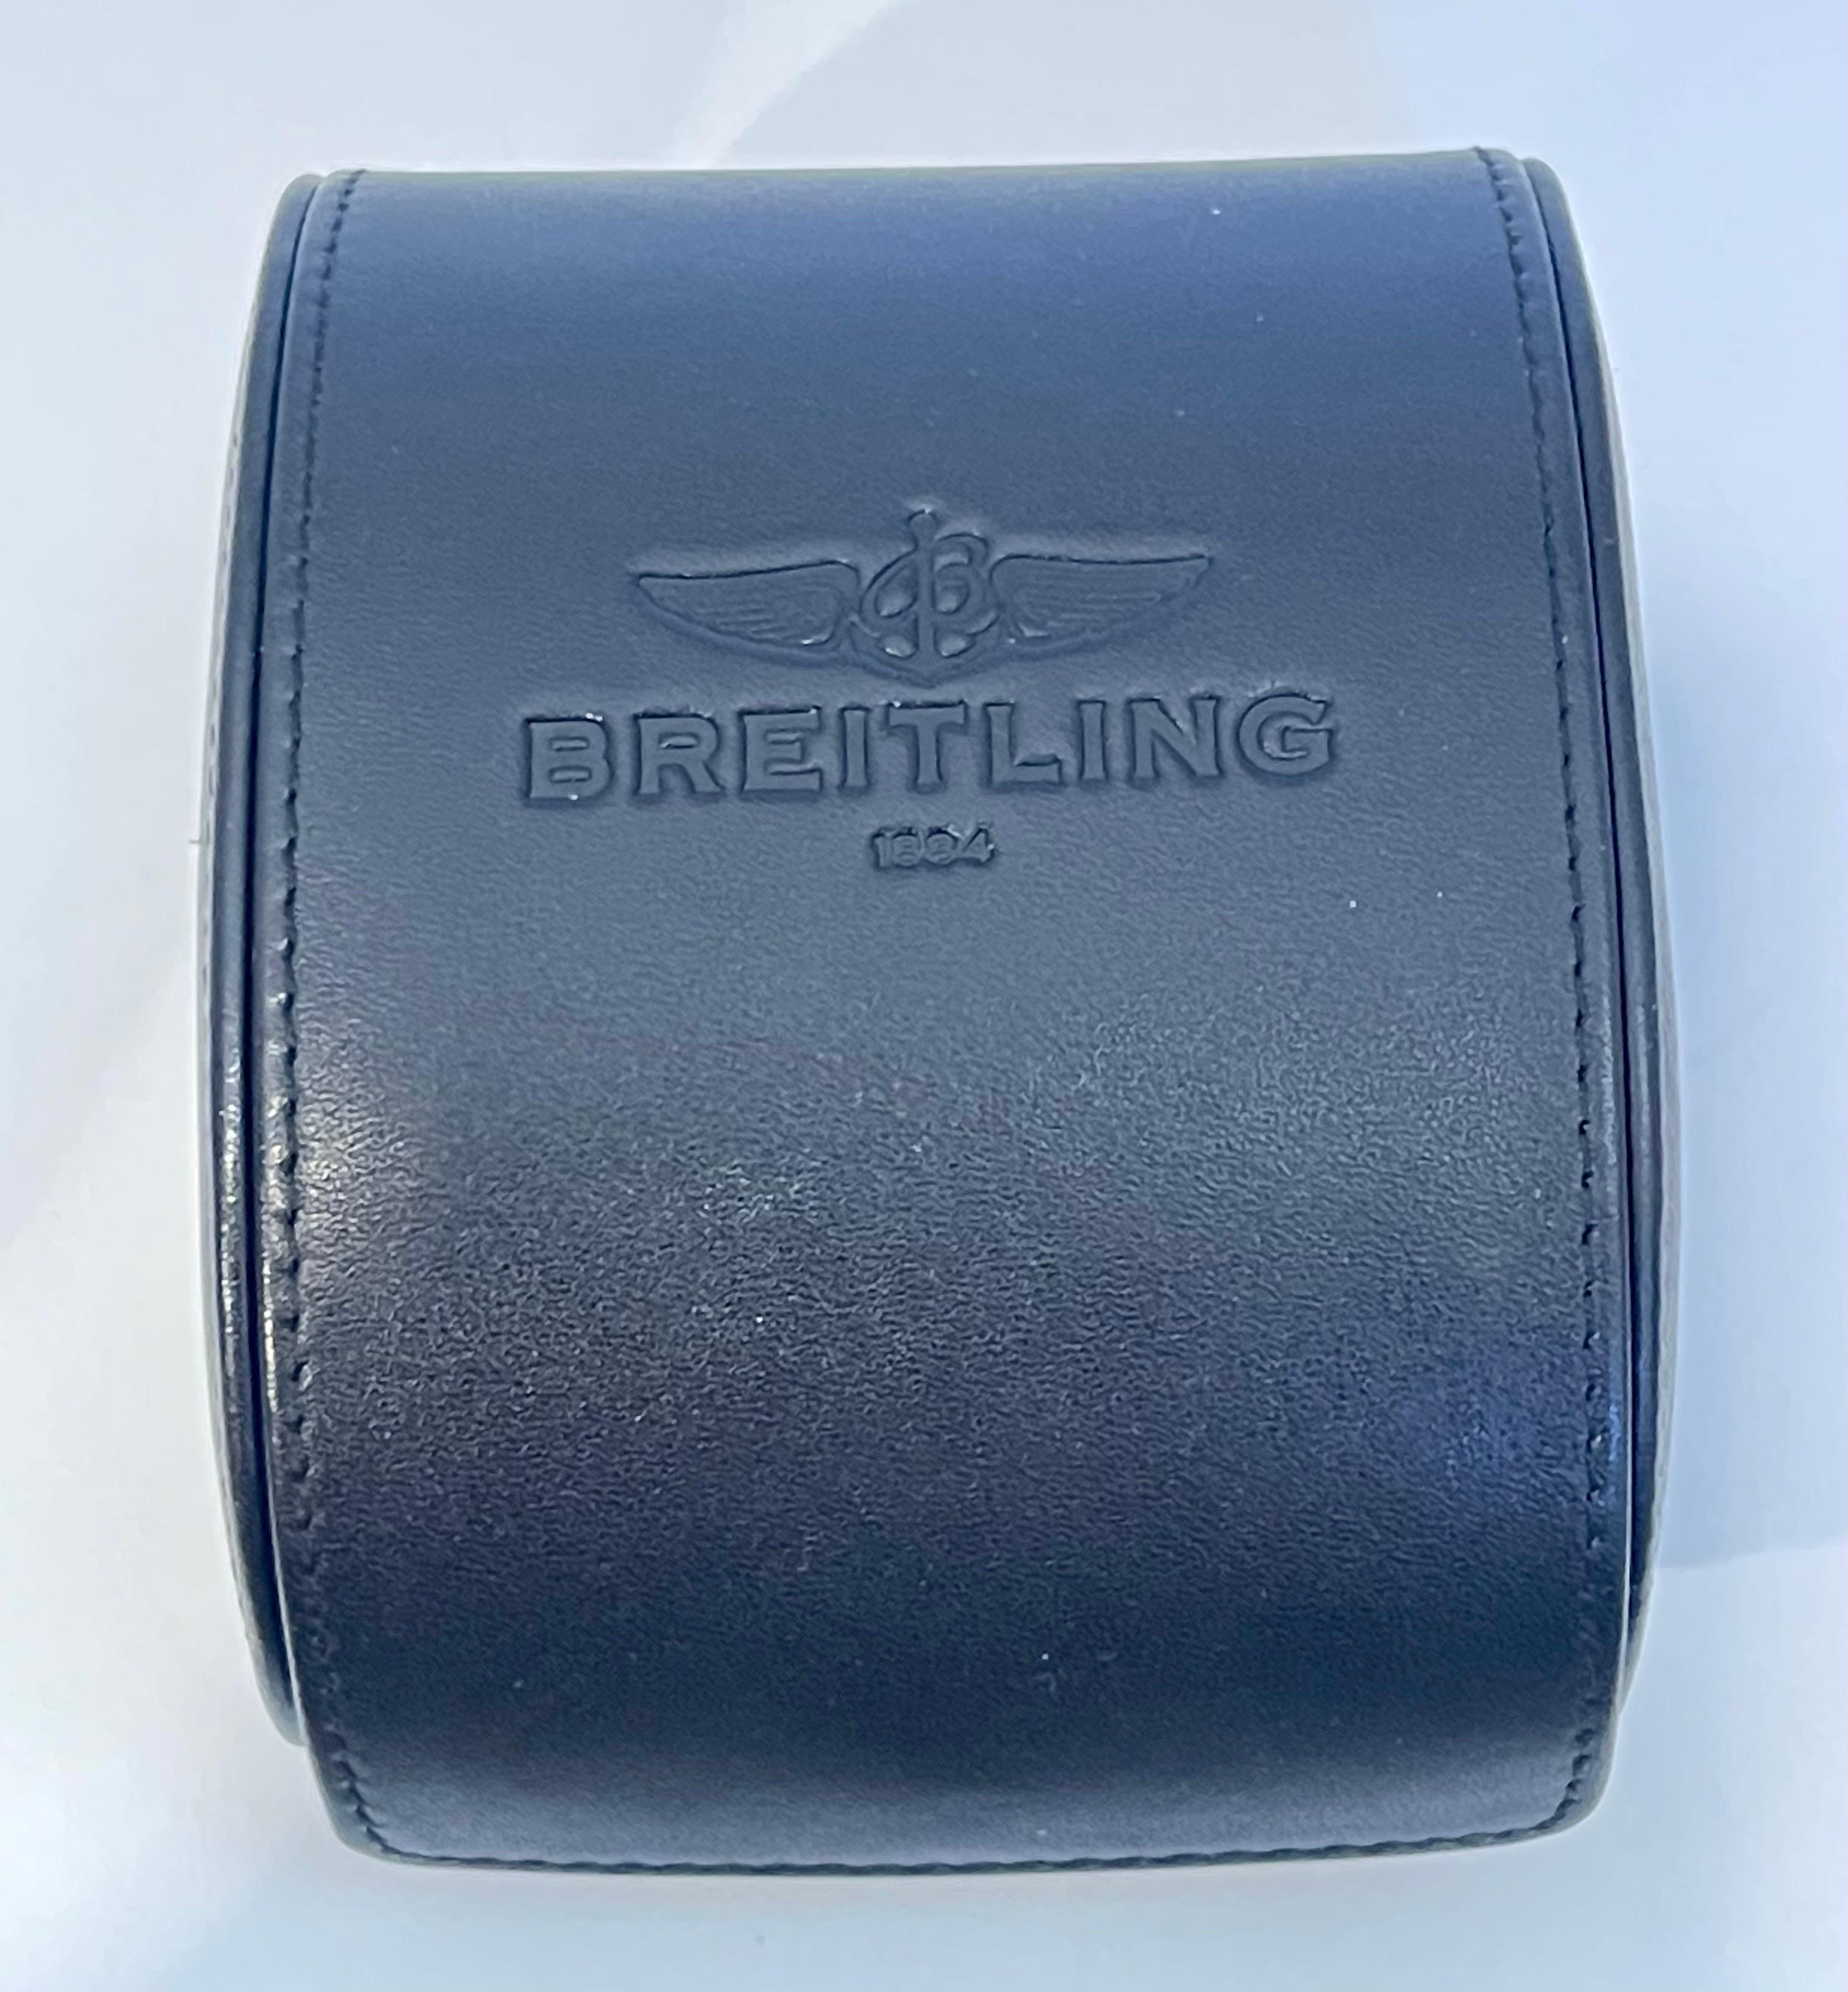 Breitling Super Avenger Chrono Limited Edition Black PVD Steel Rare, 4004422 In Excellent Condition For Sale In New York, NY